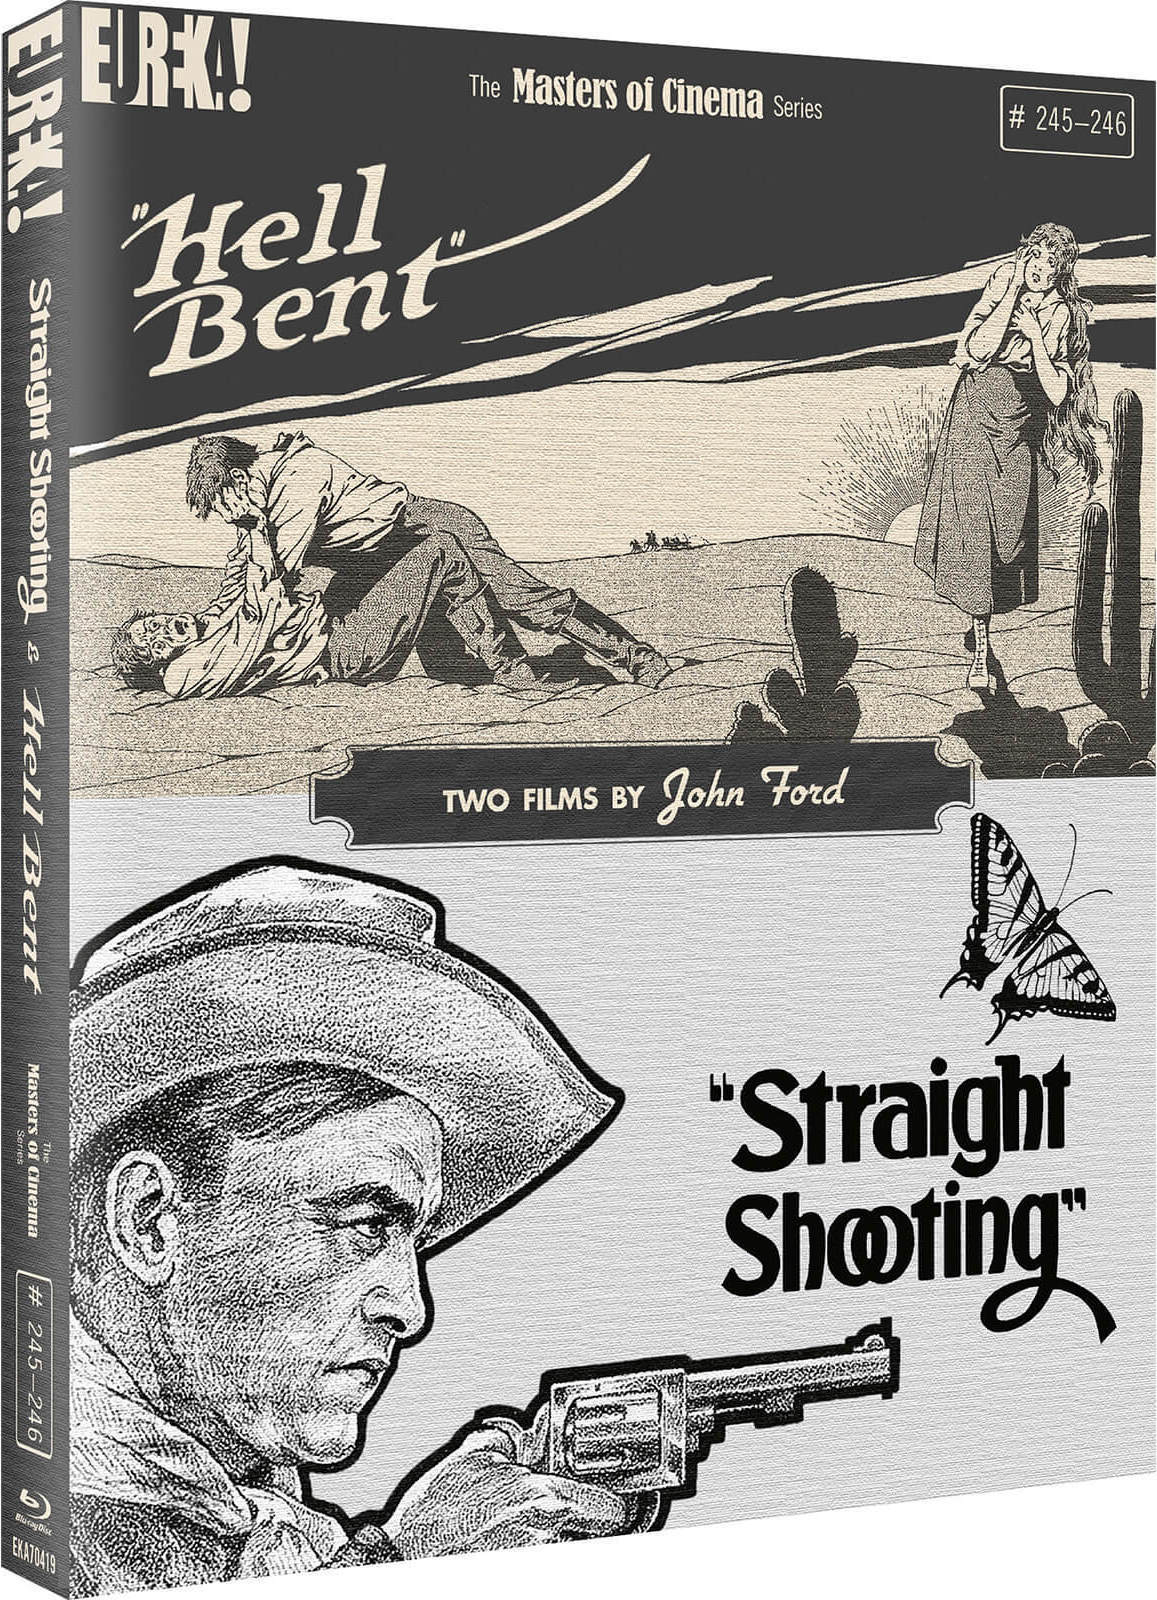 STRAIGHT SHOOTING / HELL BENT (REGION B IMPORT - LIMITED EDITION) BLU-RAY